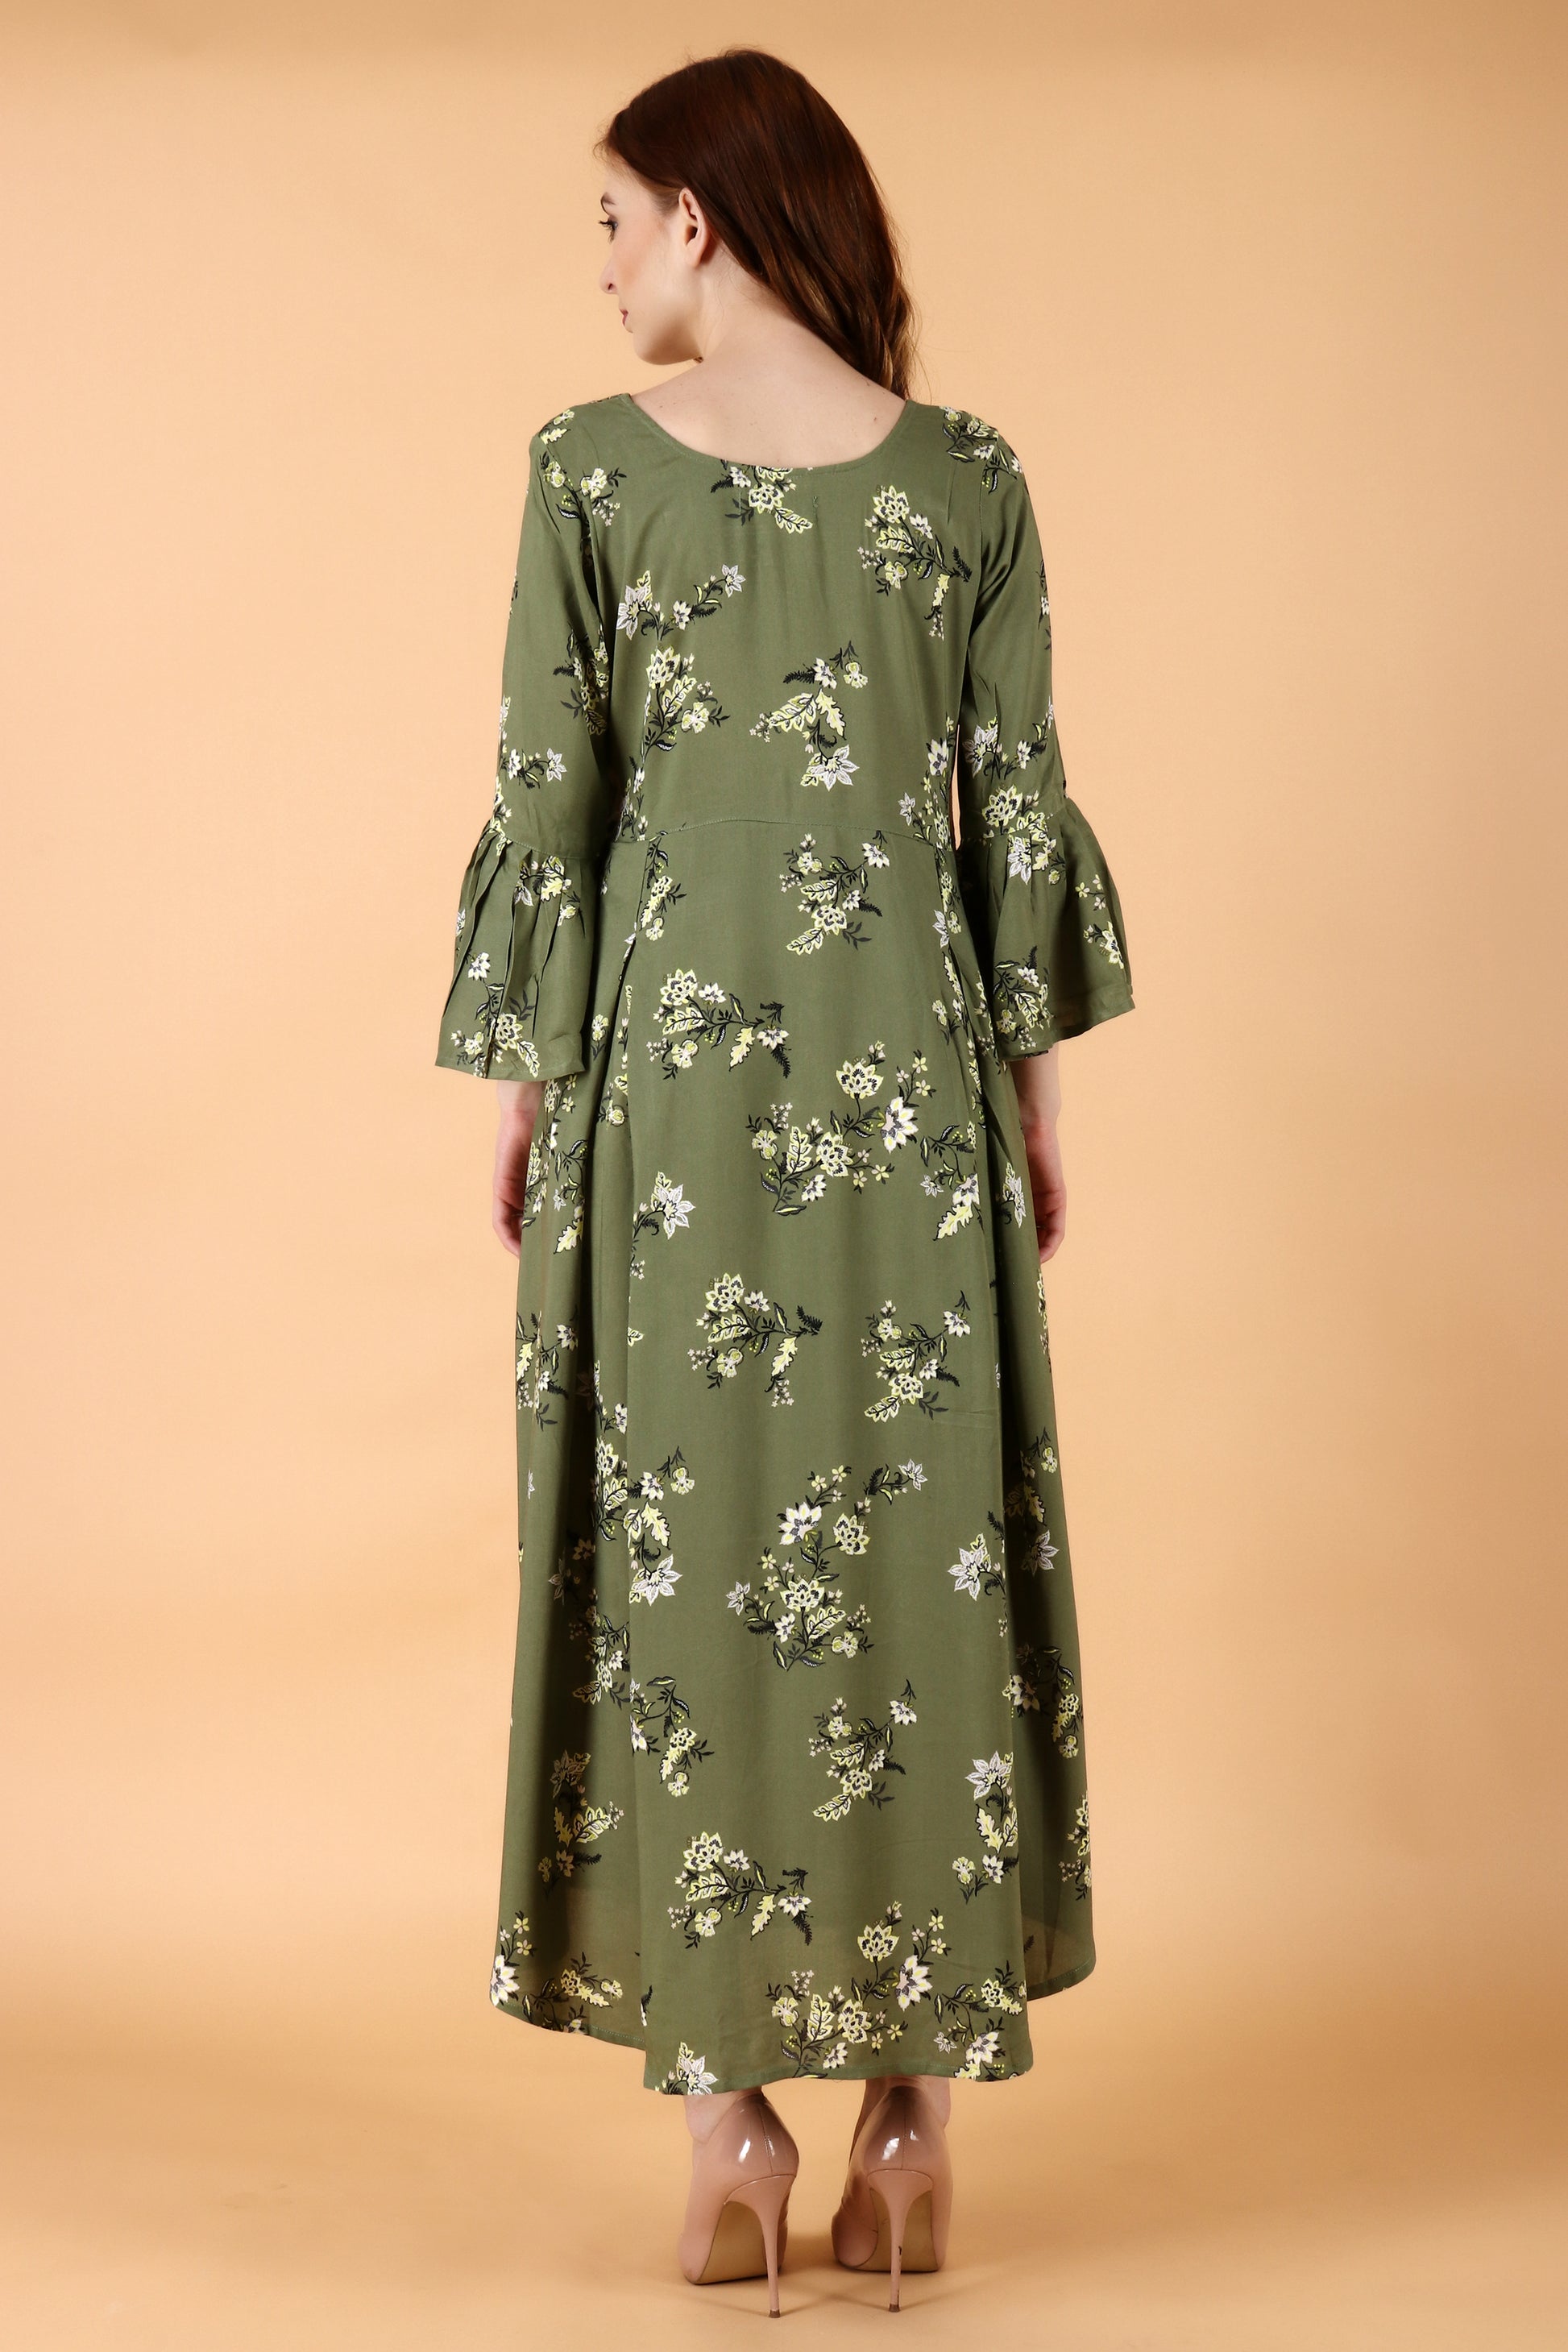 10xl, 2xl, 3xl, 4xl, 5xl, 6xl, 7xl, 8xl, 9xl, comfortable, flared, floral, frilled sleeves, olive green, peach, plus size dress, rayon, square neckline, summer wear